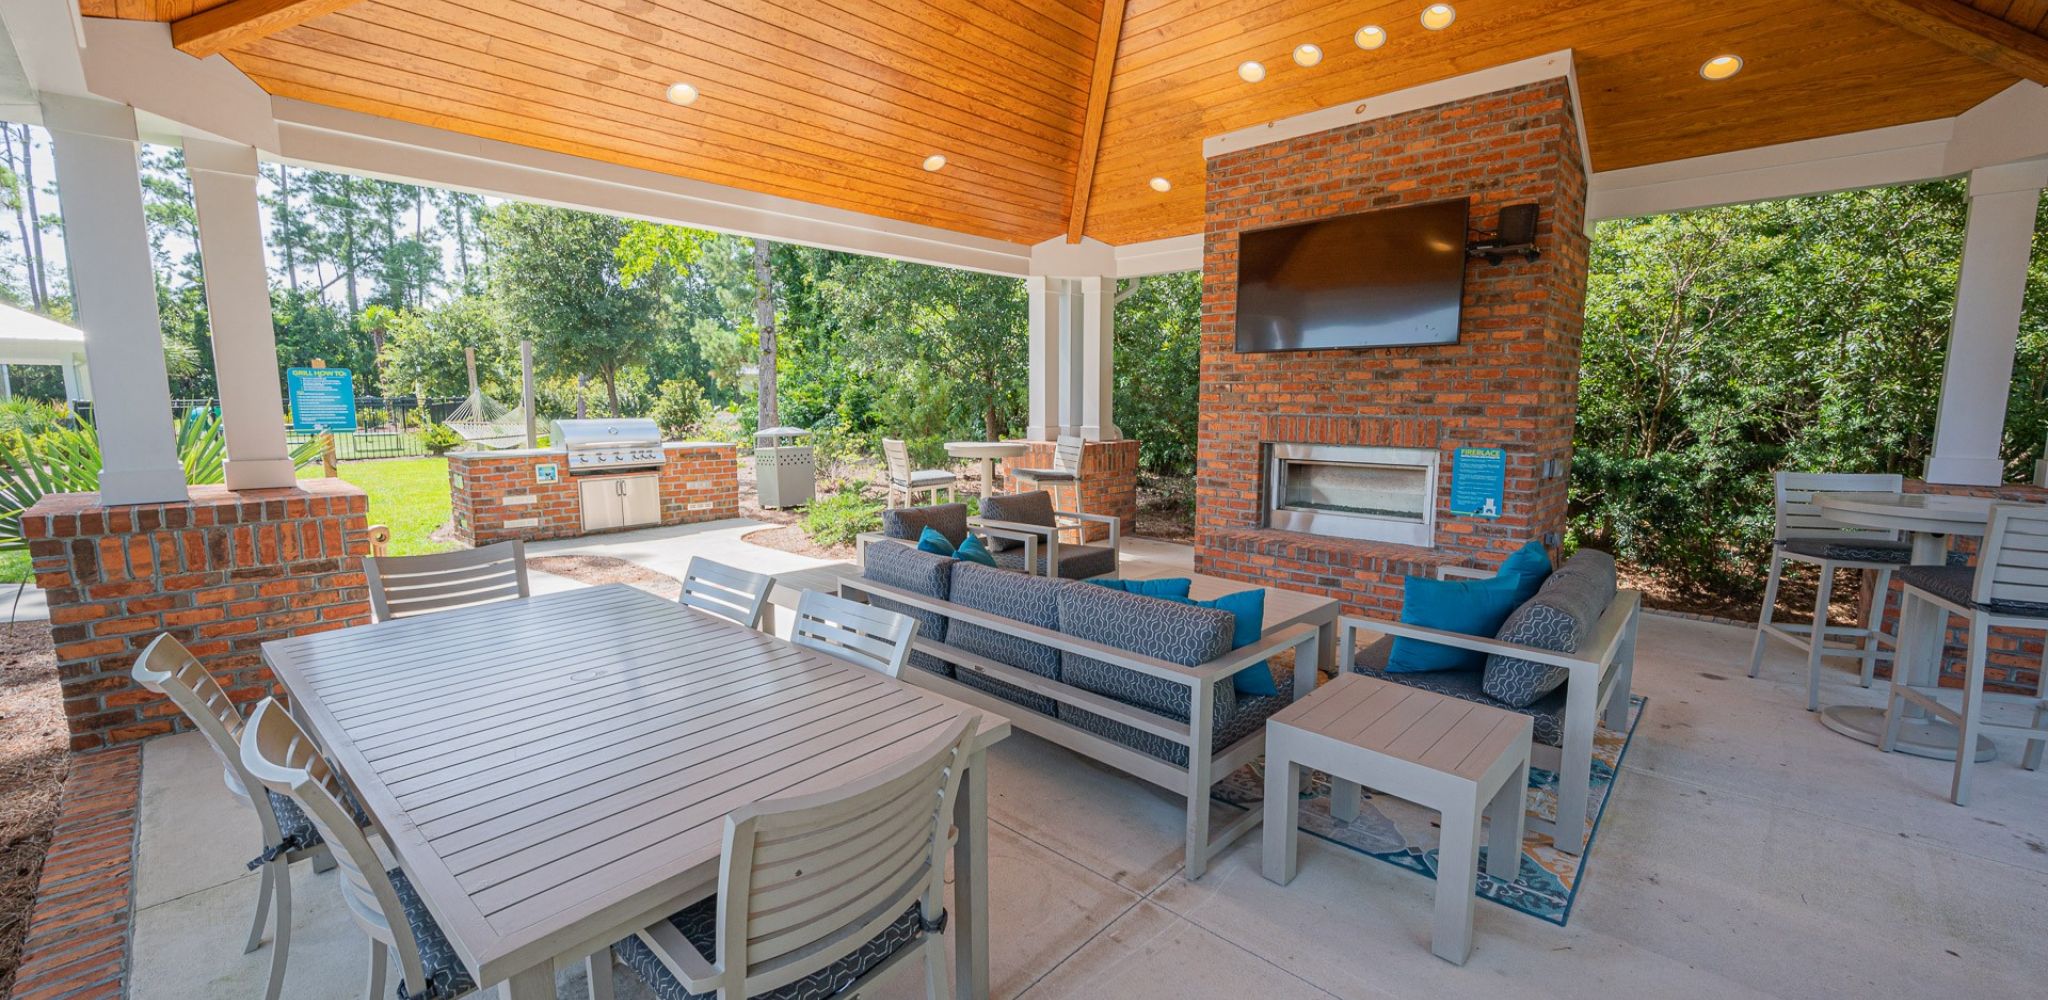 Hawthorne at the Station outdoor grilling space and gazebo with lounge seating and fireplace